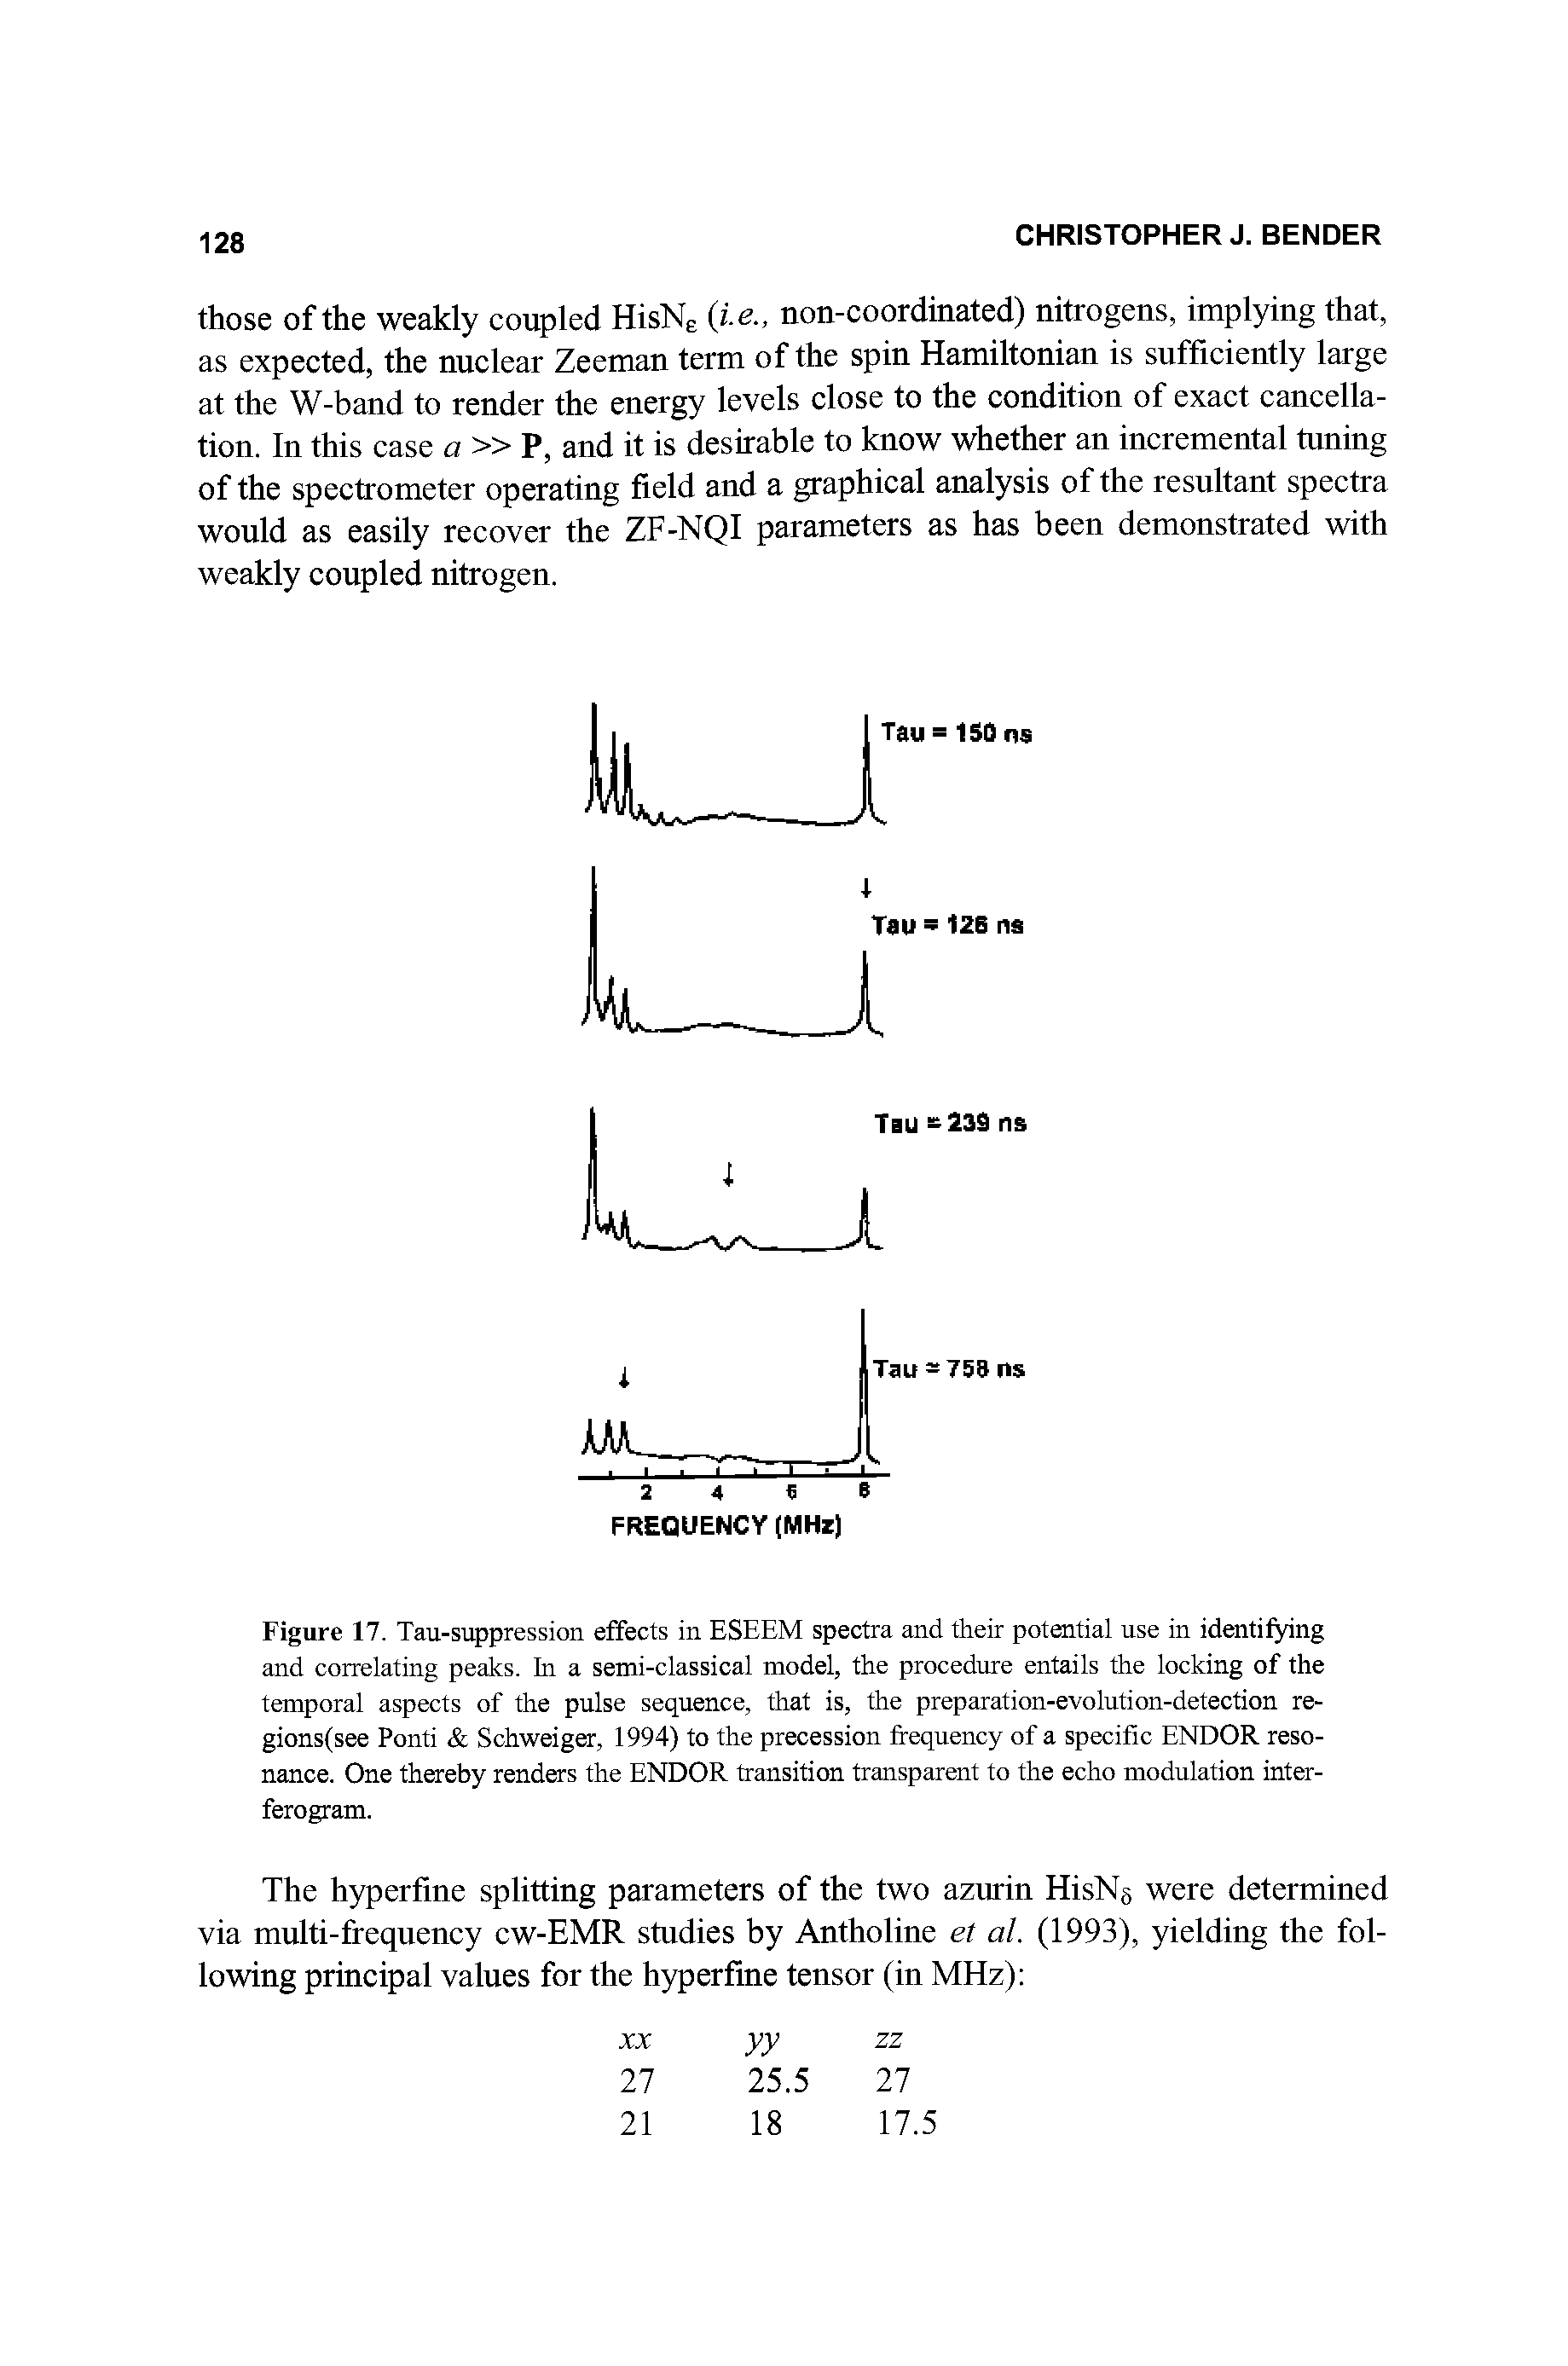 Figure 17. Tau-suppression effects in ESEEM spectra and their potential use in identifying and correlating peaks. In a semi-classical model, the procedure entails the locking of the temporal aspects of the pulse sequence, that is, the preparation-evolution-detection re-gionsfsee Ponti Schweiger, 1994) to the precession frequency of a specific ENDOR resonance. One thereby renders the ENDOR transition transparent to the echo modulation inter-ferogram.